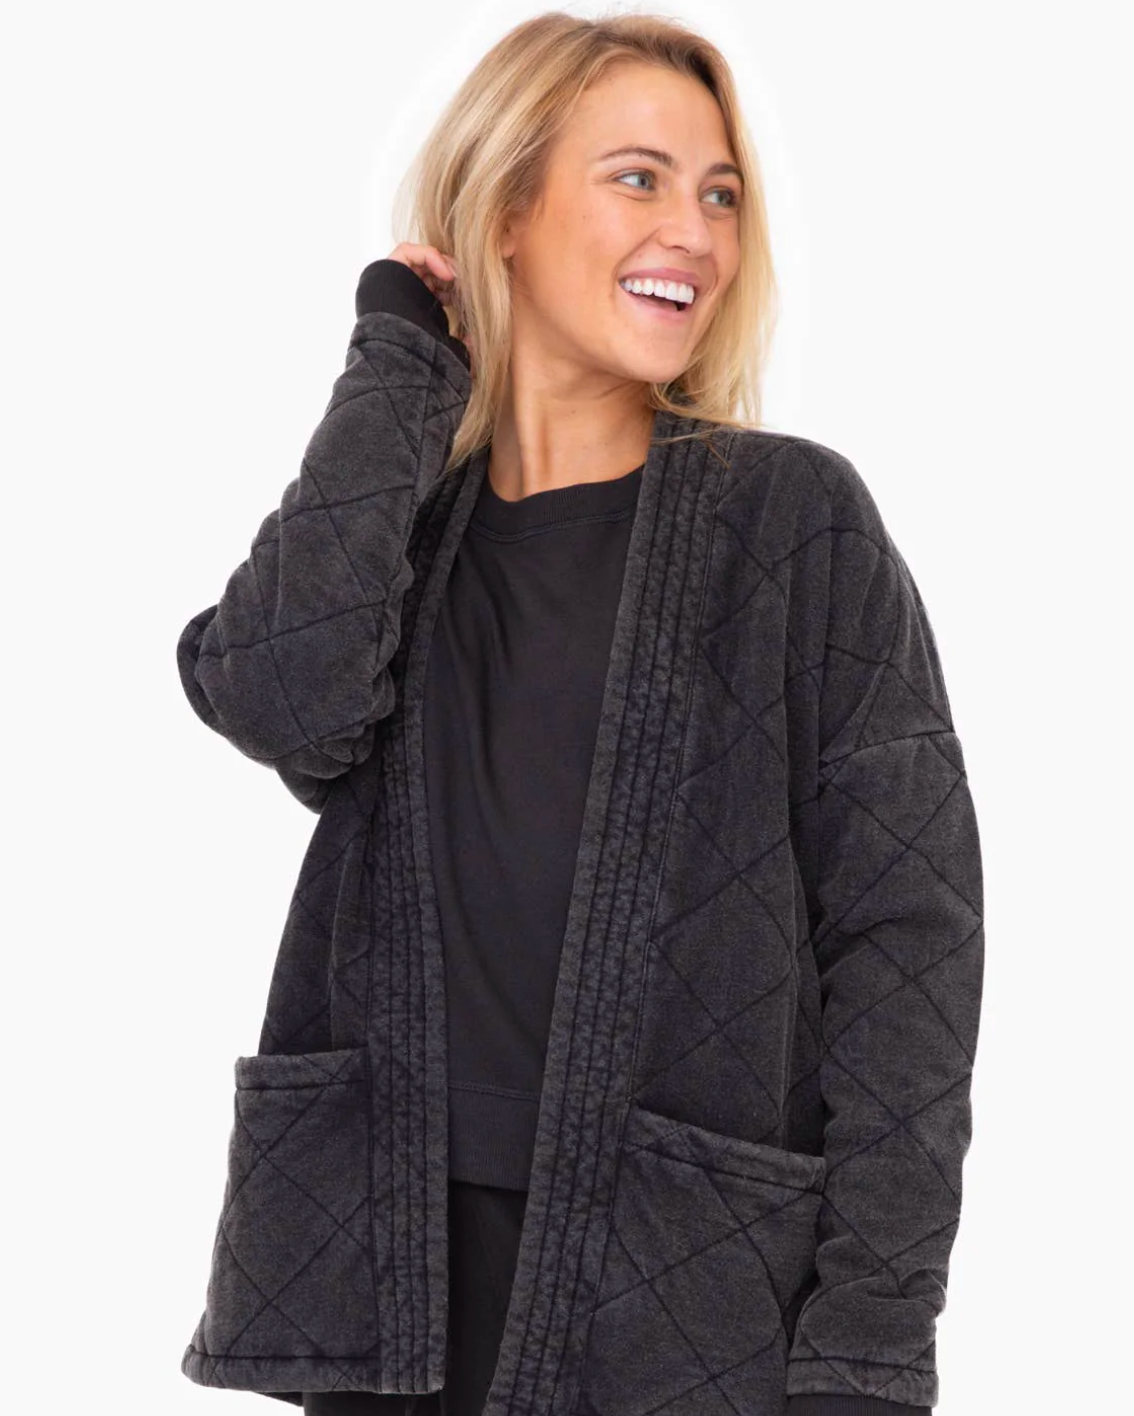 Model wearing Mono B Quilted Mineral Washed wrap jacket in black on a white background